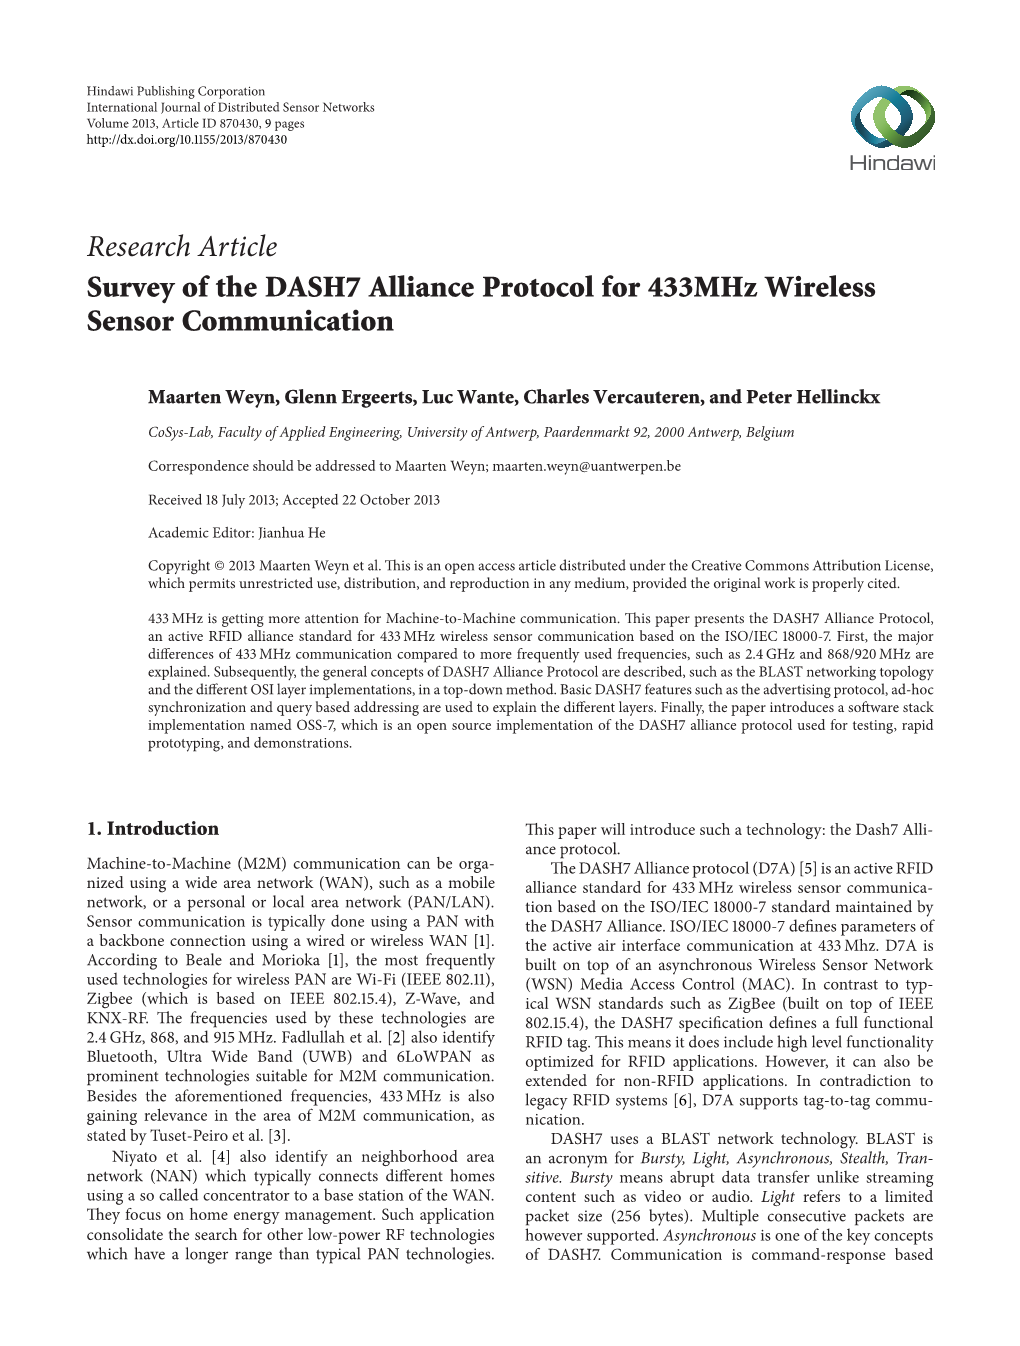 Research Article Survey of the DASH7 Alliance Protocol for 433Mhz Wireless Sensor Communication